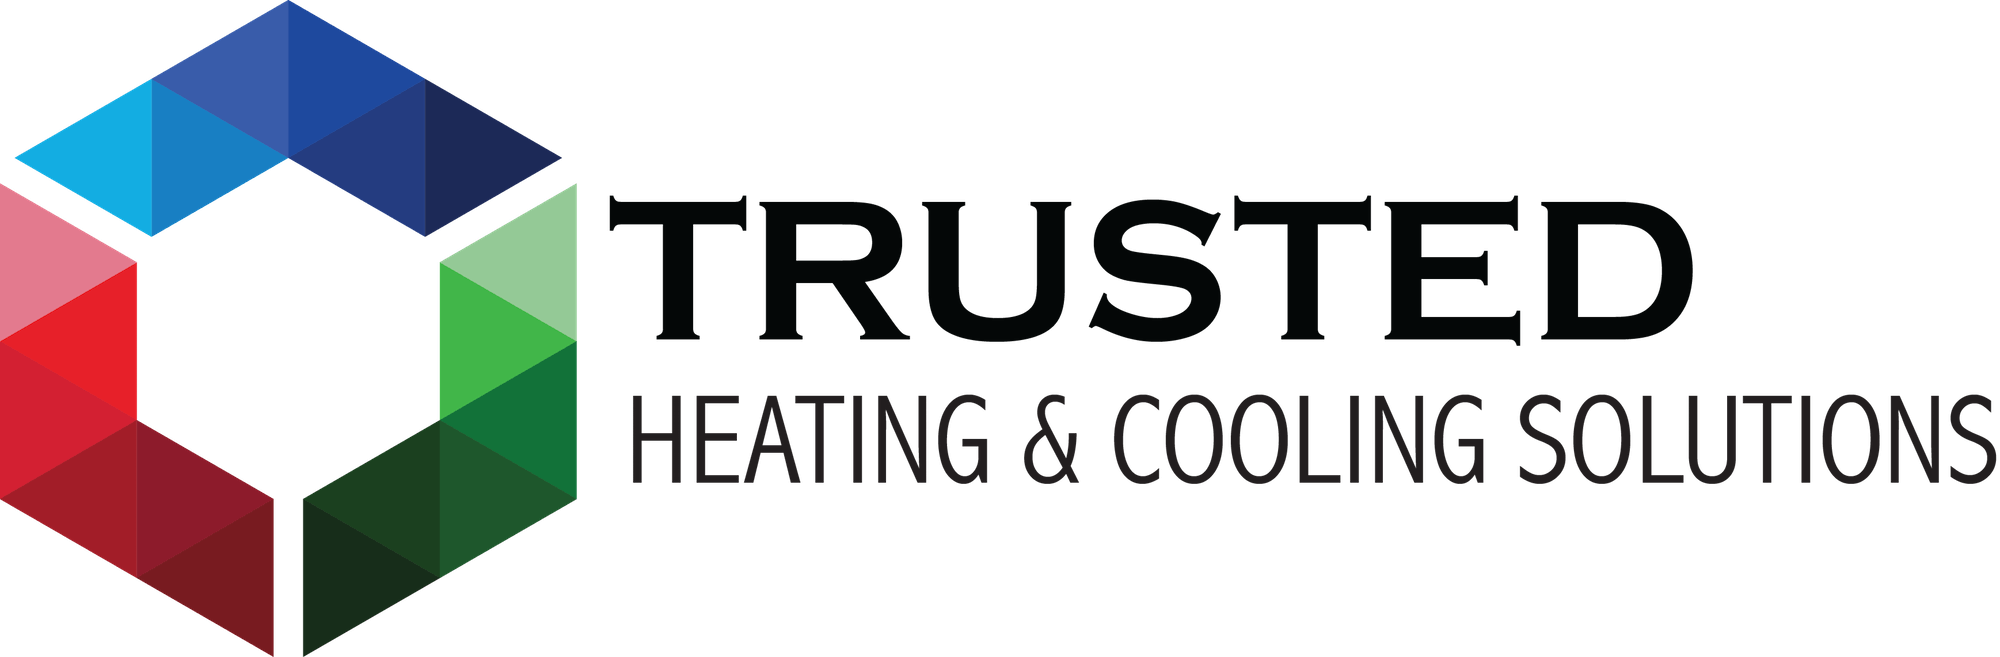 Trusted Heating & Cooling Solutions